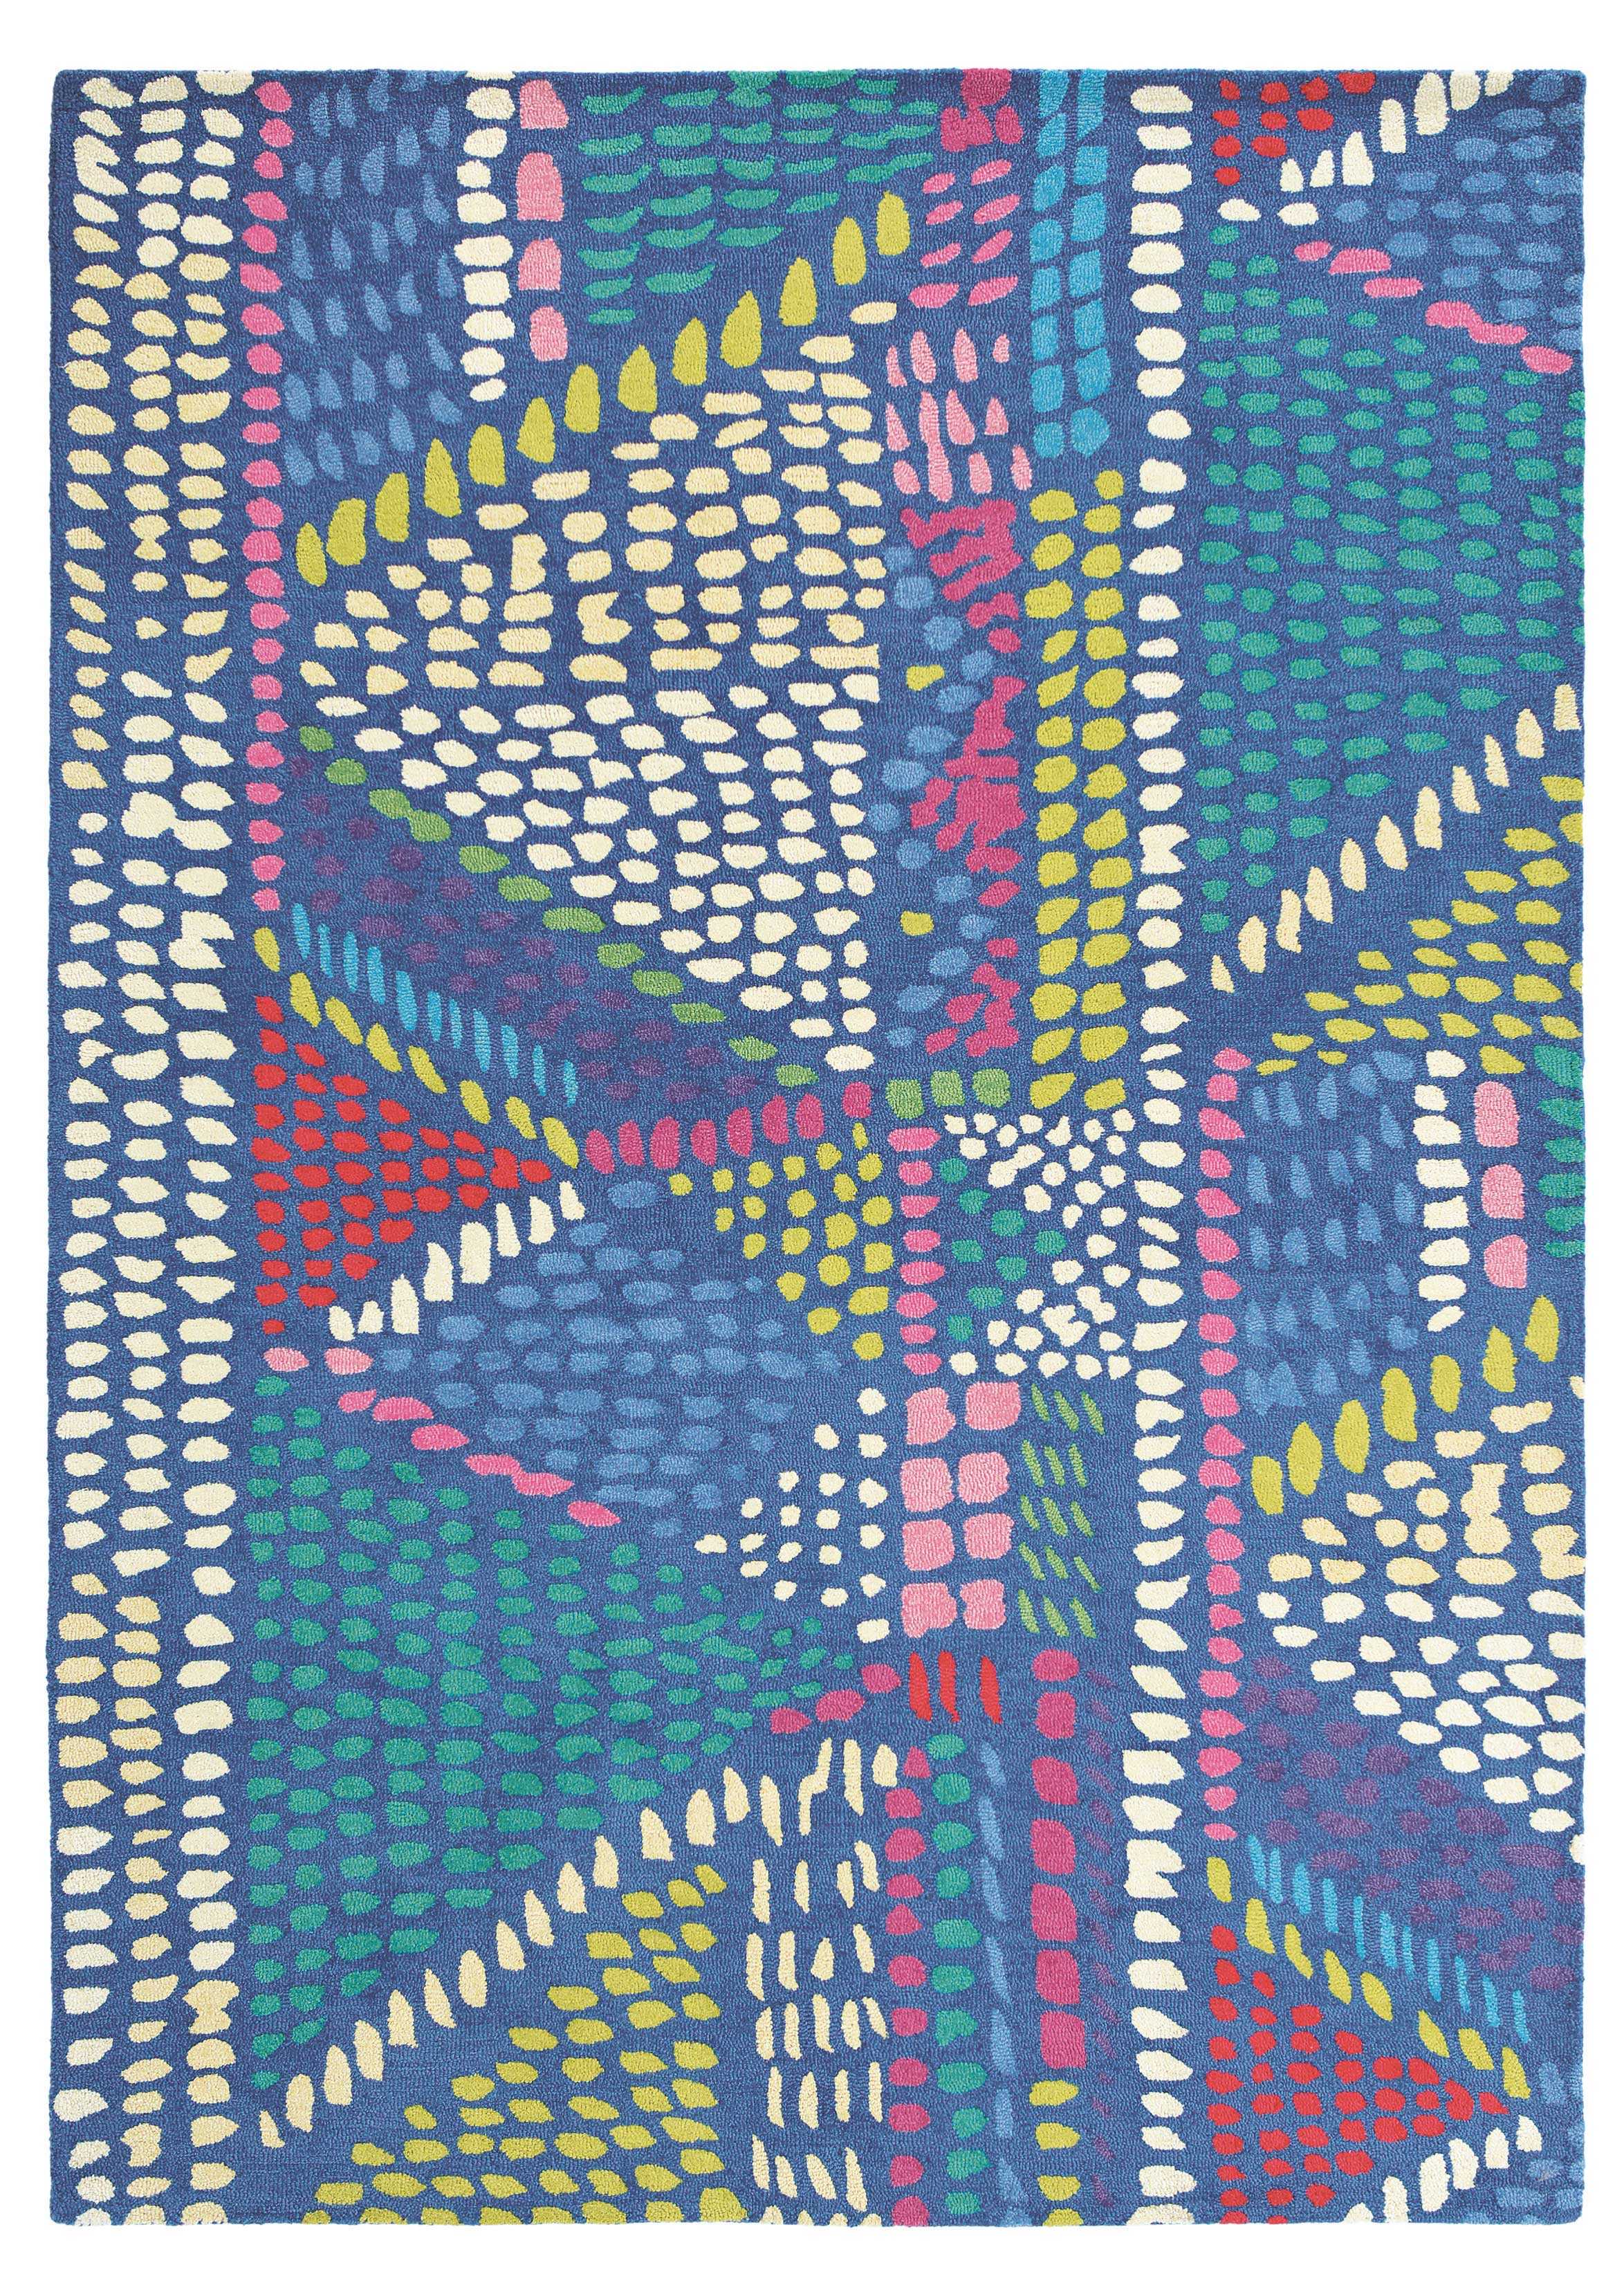 Rectangular blue wool rug with abstract geometric dot design in pink, yellow, blue and ivory